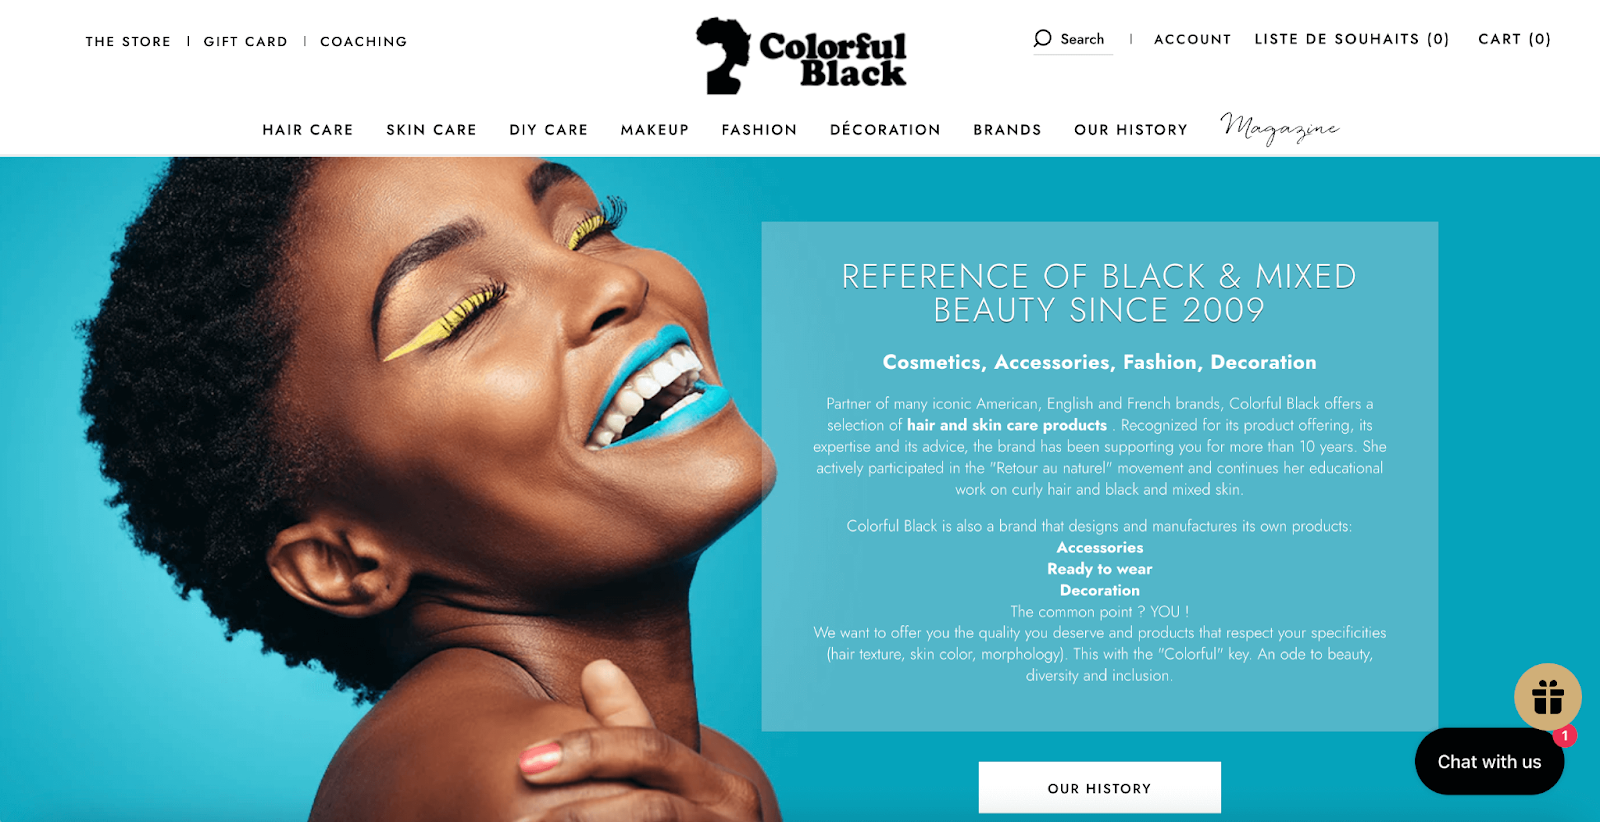 Support Black-owned businesses–A screenshot of Colorful Black’s homepage and text explaining their history that reads, “Reference of Black & Metisse Beauty Since 2009. Cosmetics, Accessories, Fashion, Decoration. Partner of many iconic American, English and French brands, Colorful Black offers a selection of hair and skin care products . Recognized for its product offering, its expertise and its advice, the brand has been supporting you for more than 10 years. She actively participated in the "Retour au naturel" movement and continues her educational work on curly hair and black and mixed skin. Colorful Black is also a brand that designs and manufactures its own products: Accessories, ready to wear, decoration. The common point? YOU! We want to offer you the quality you deserve and products that respect your specificities (hair texture, skin color, morphology). This with the "Colorful" key. An ode to beauty, diversity and inclusion.” 